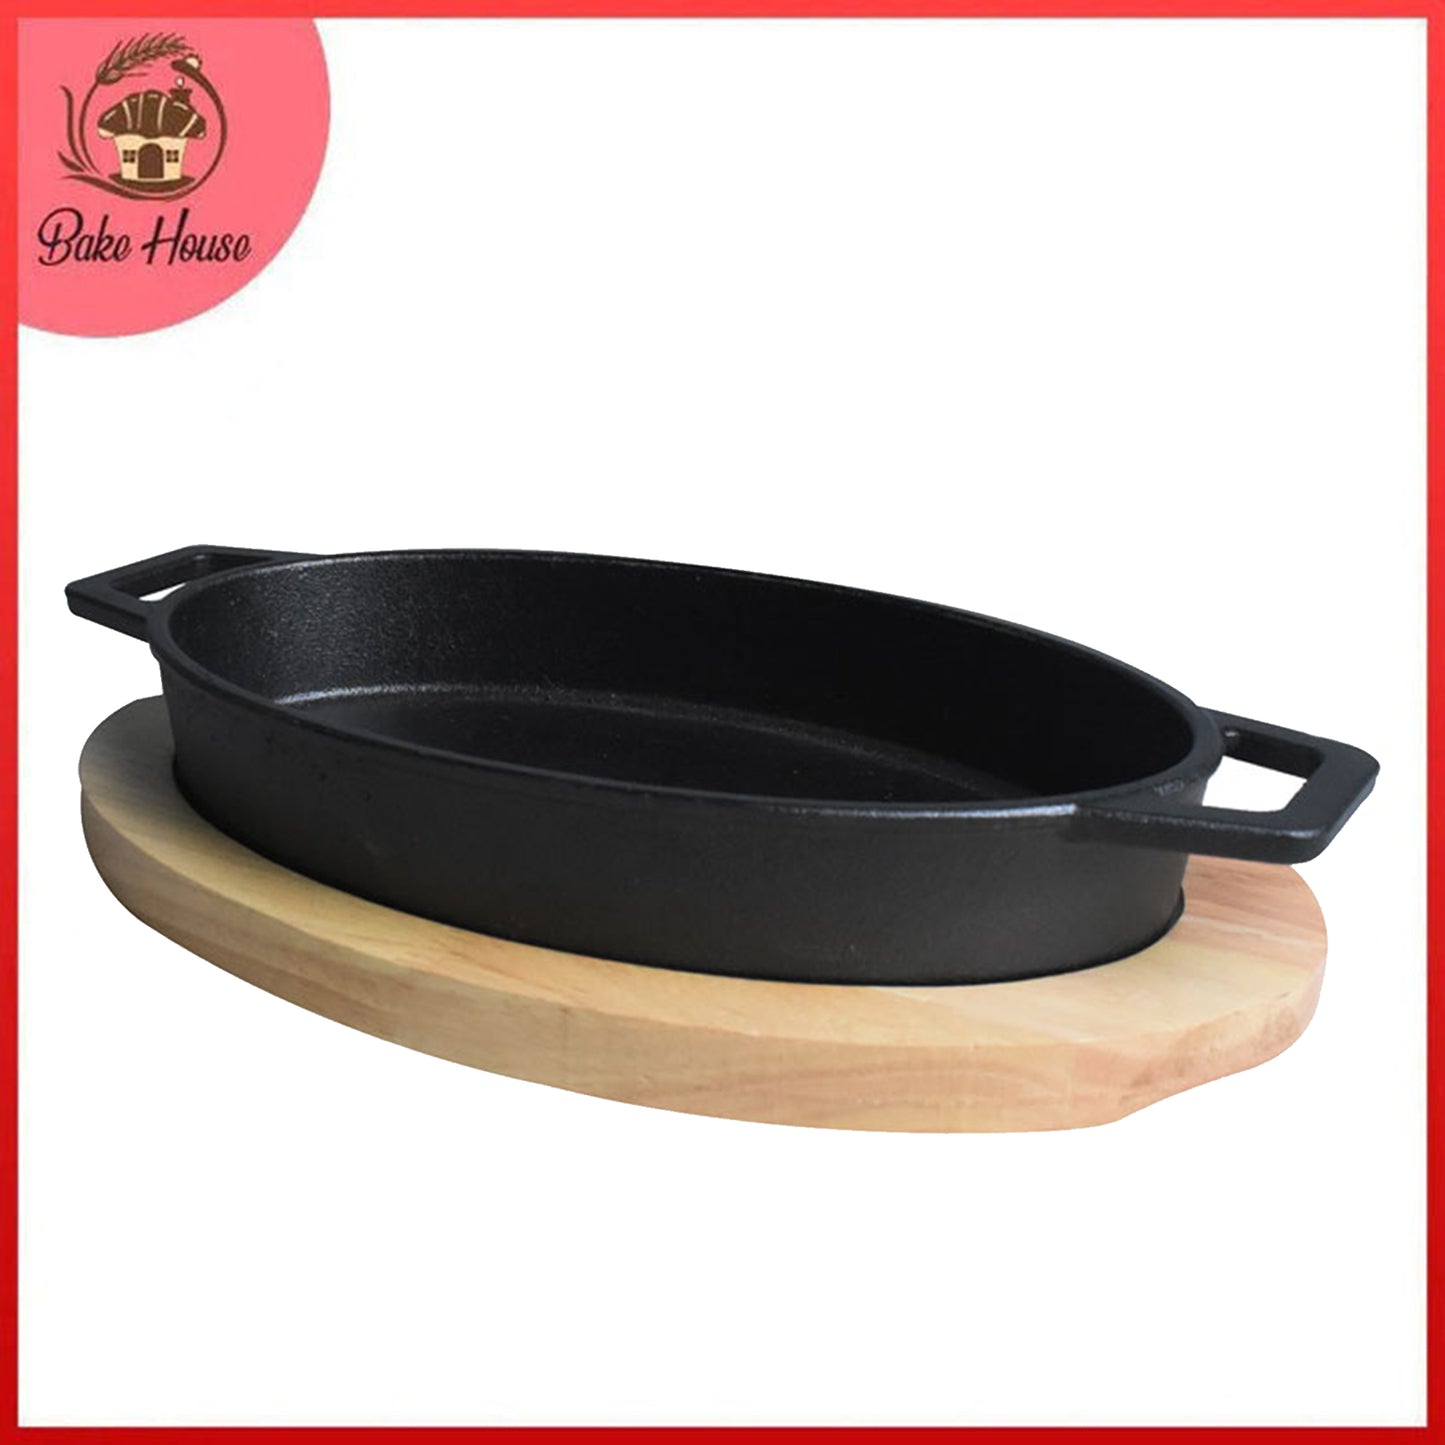 Oval Cast Iron Sizzler Pan (24.5 x 15.5cm) With Wooden Base